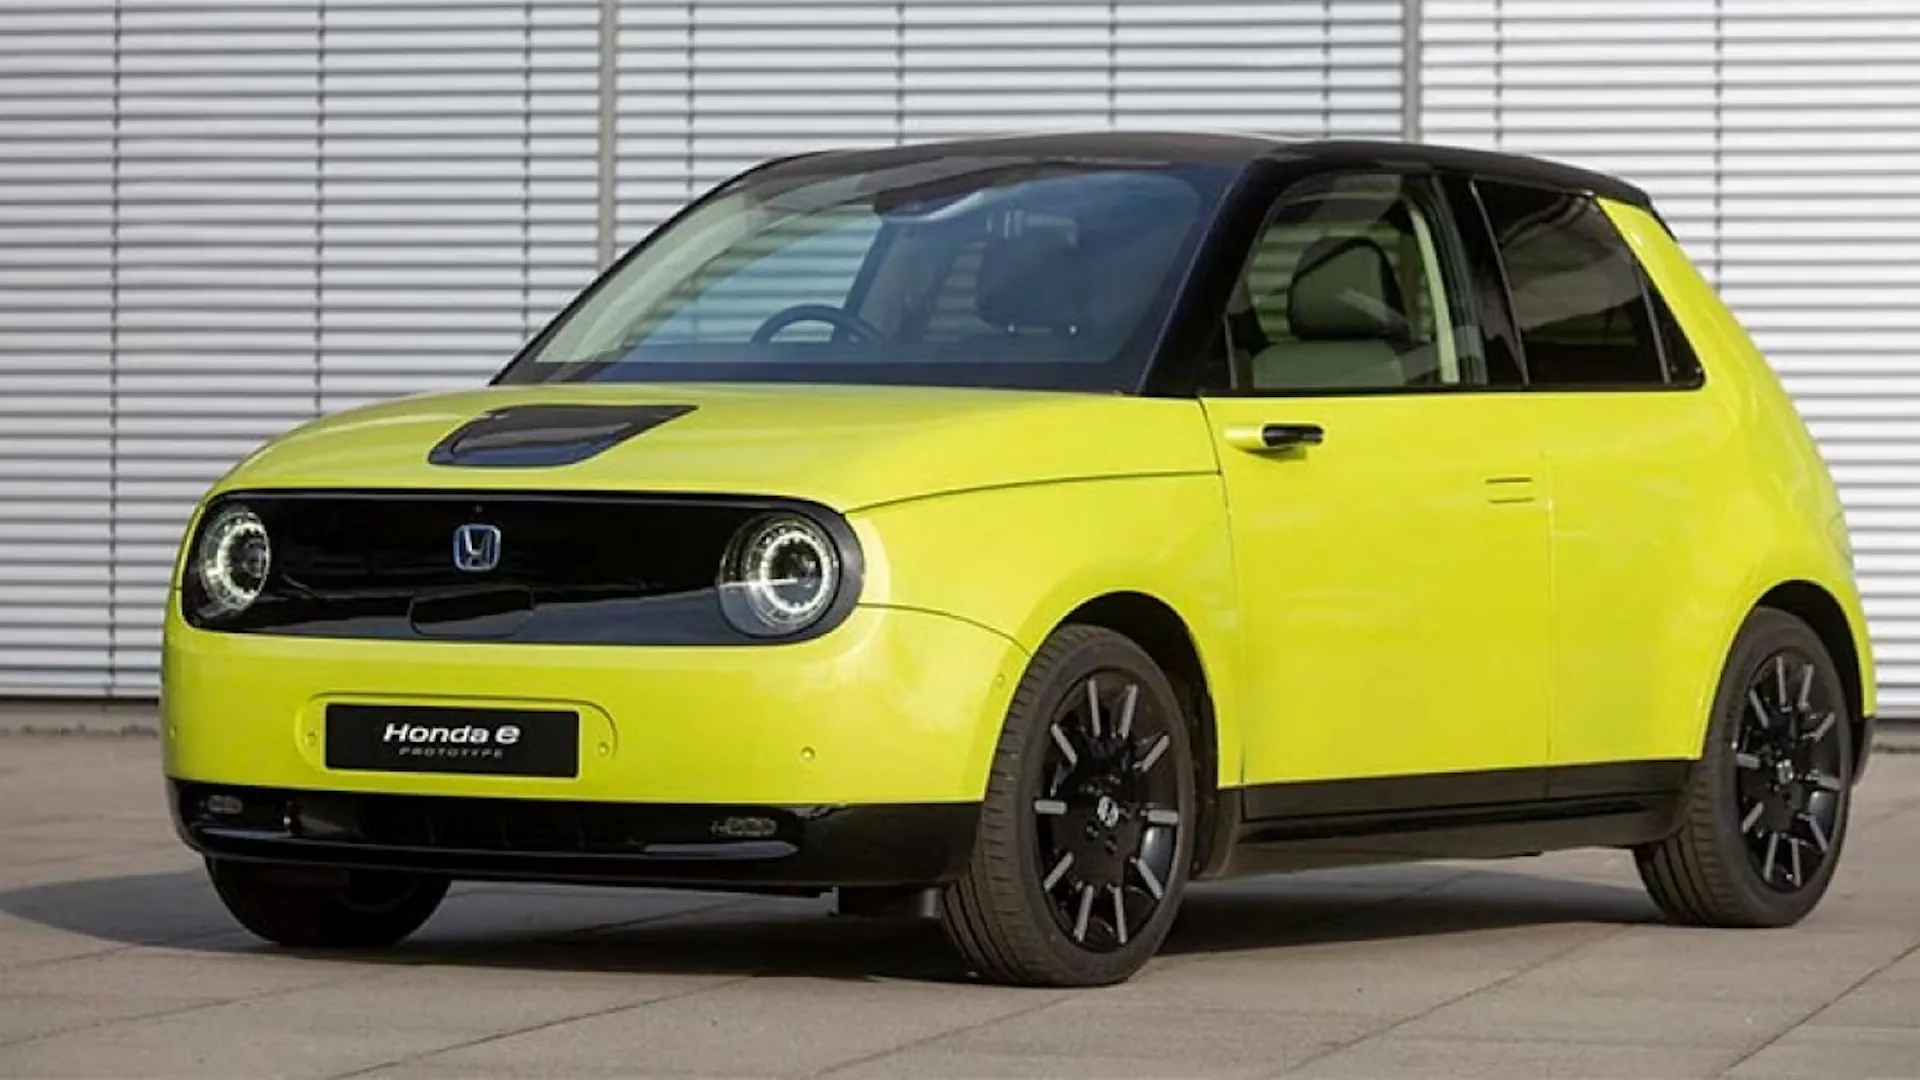 The end of the journey for “Honda e” – the manufacturer is discontinuing its urban EV